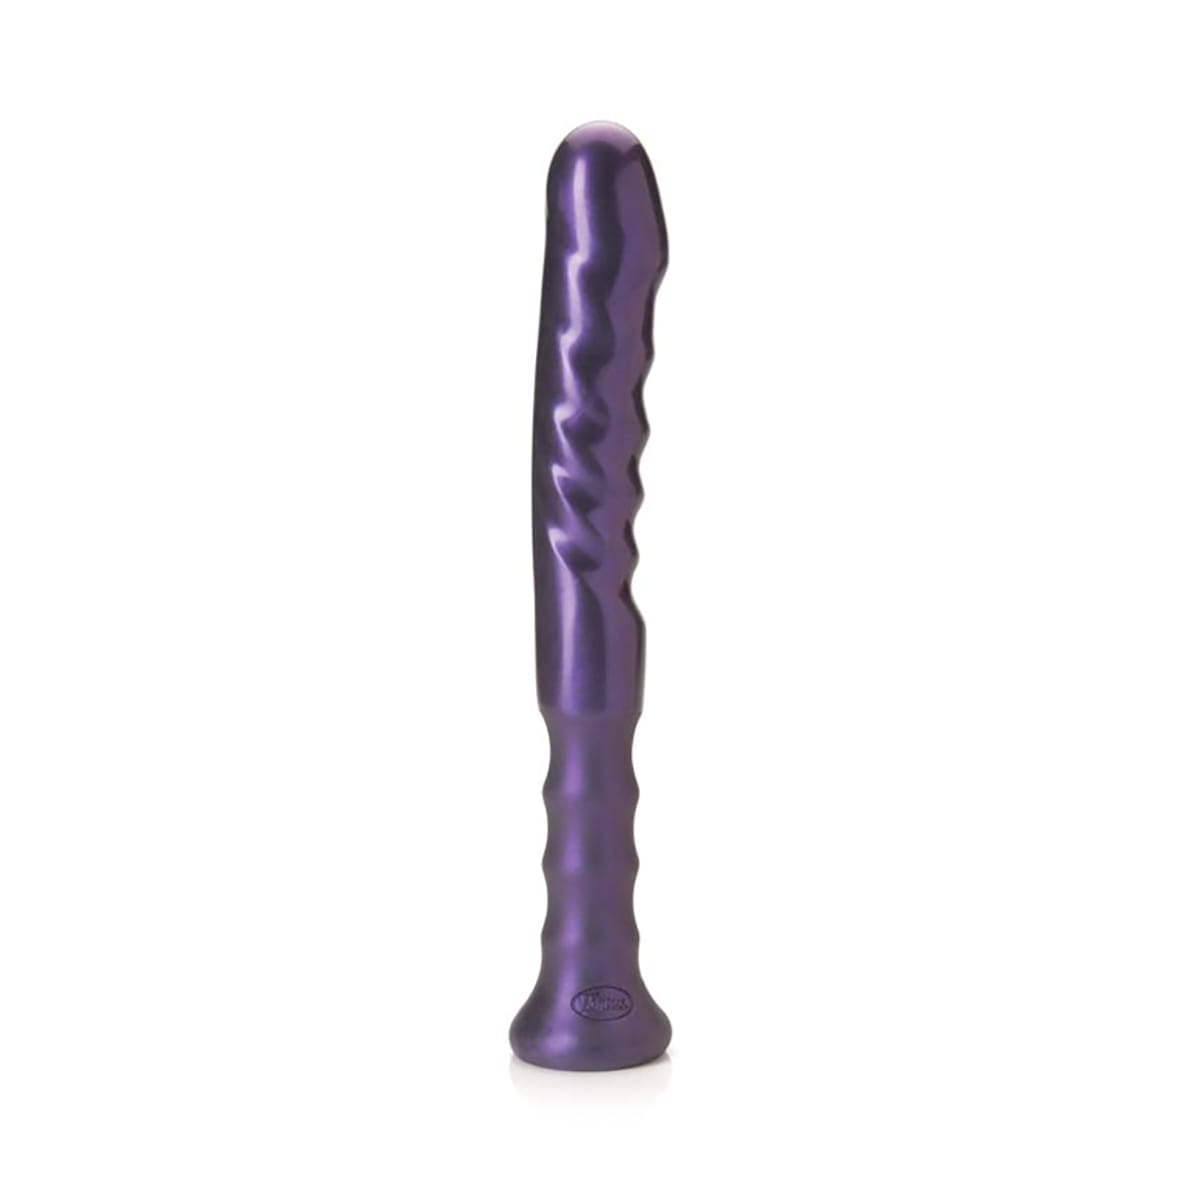 Buy Tantus Echo Handle Dildo  Purple CLAM  long and  thick dildo made by Tantus.